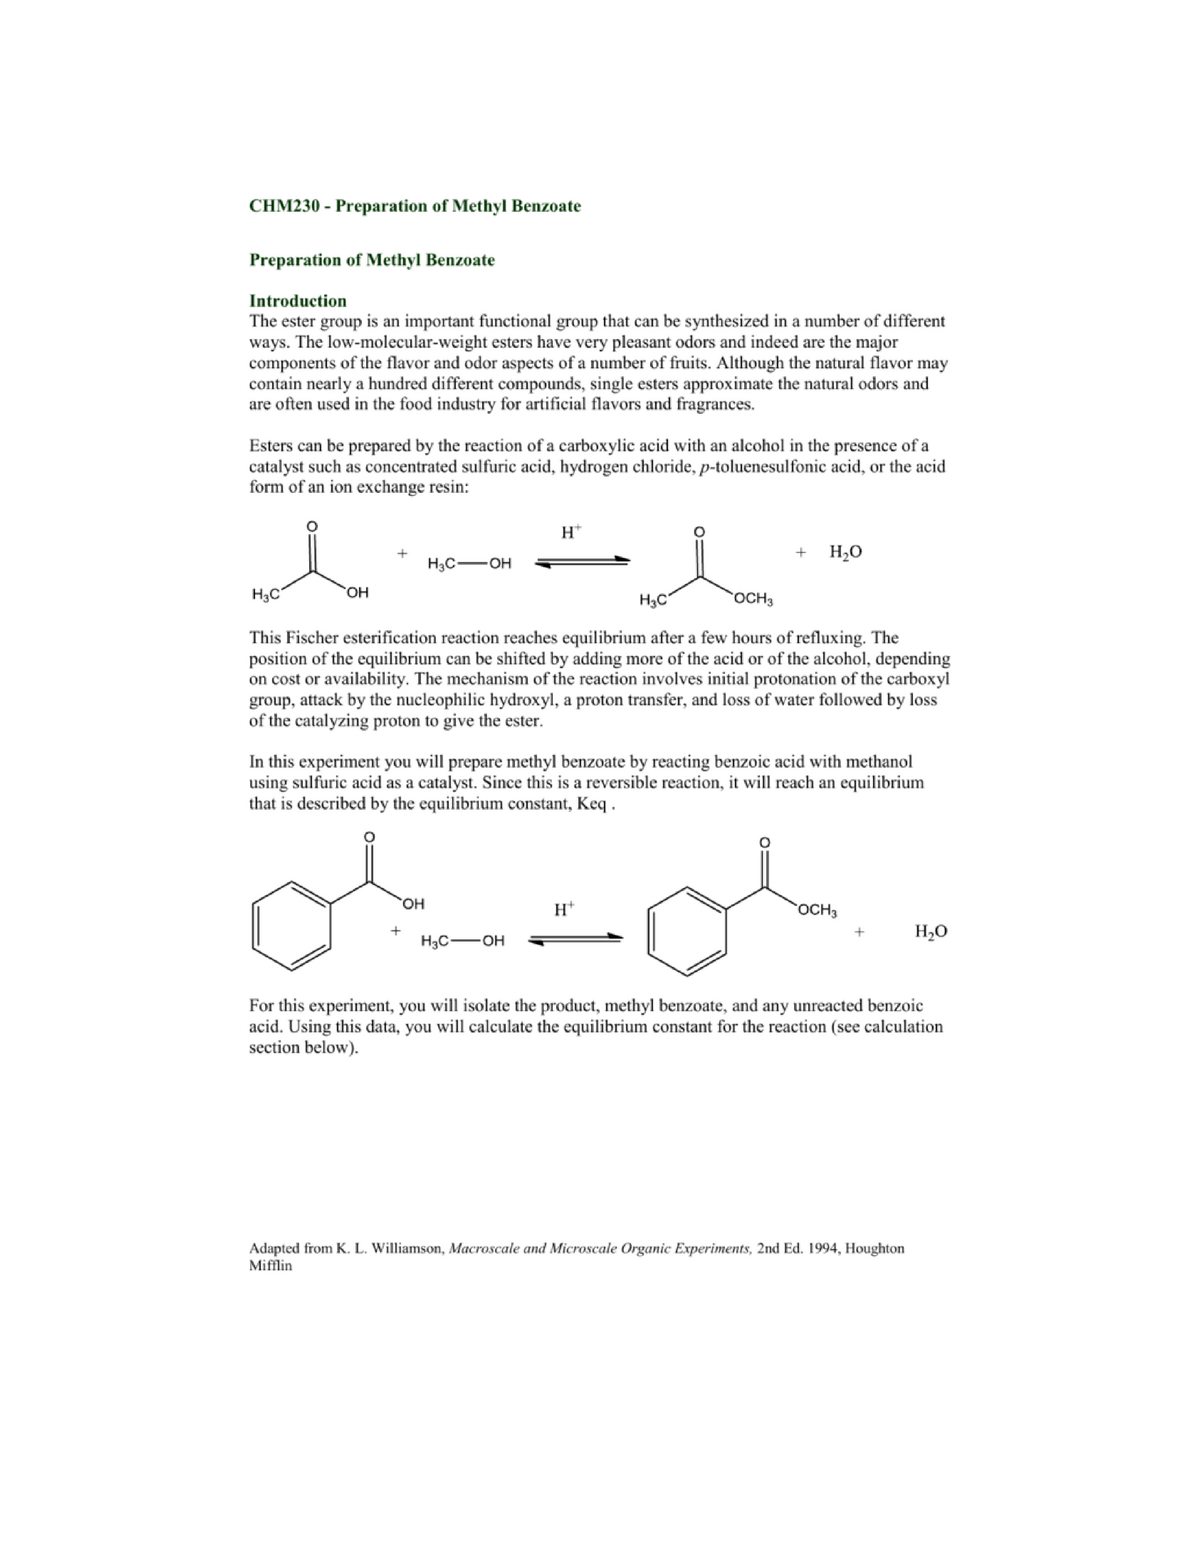 assignment of organic chemistry